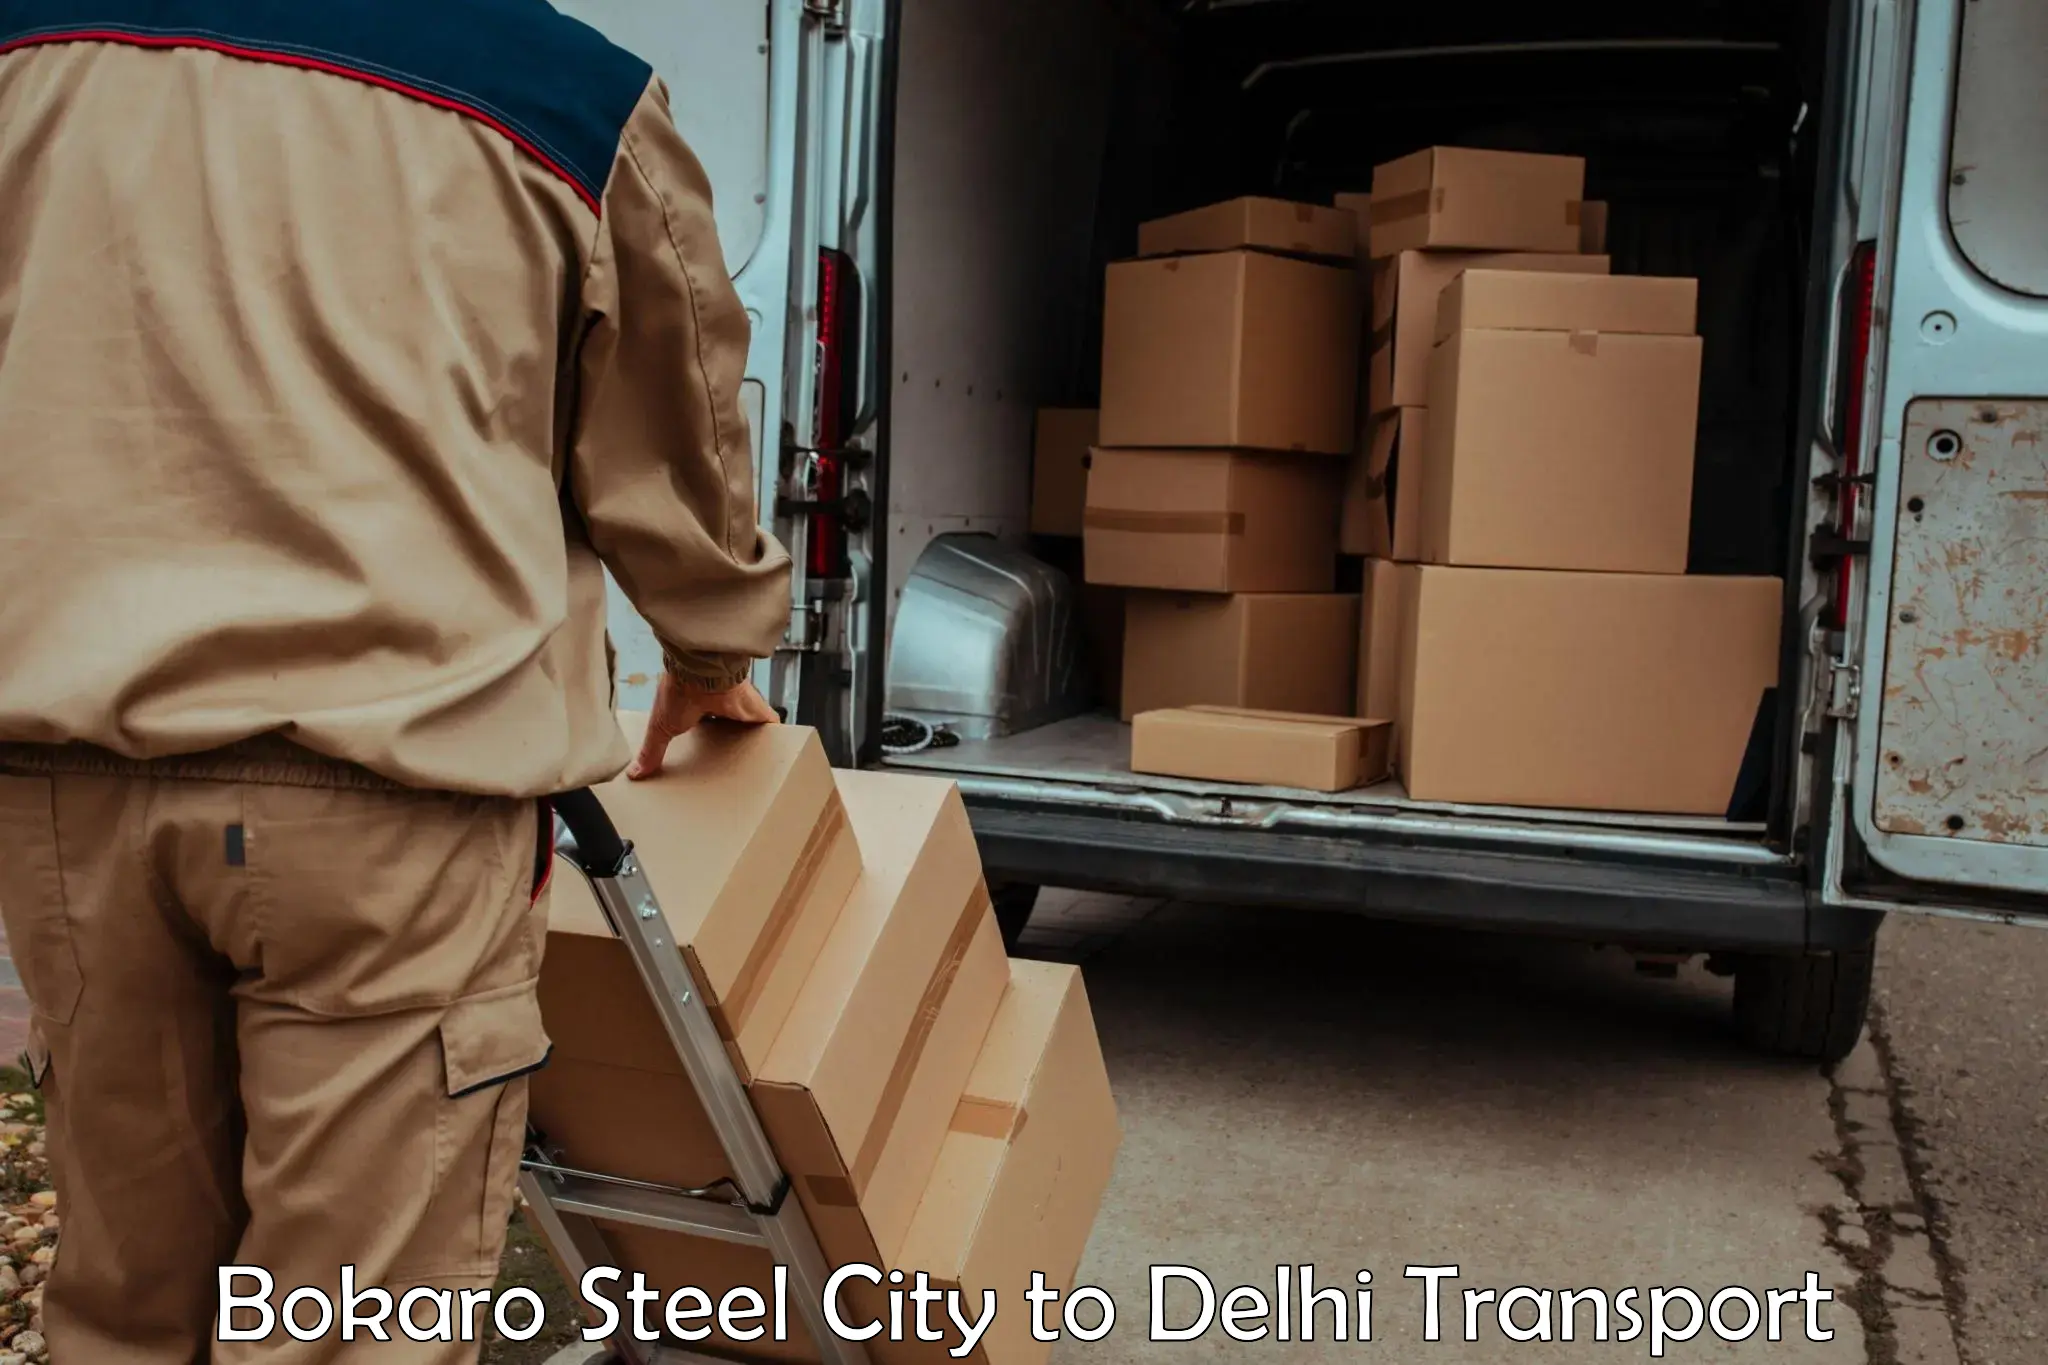 Truck transport companies in India Bokaro Steel City to NCR